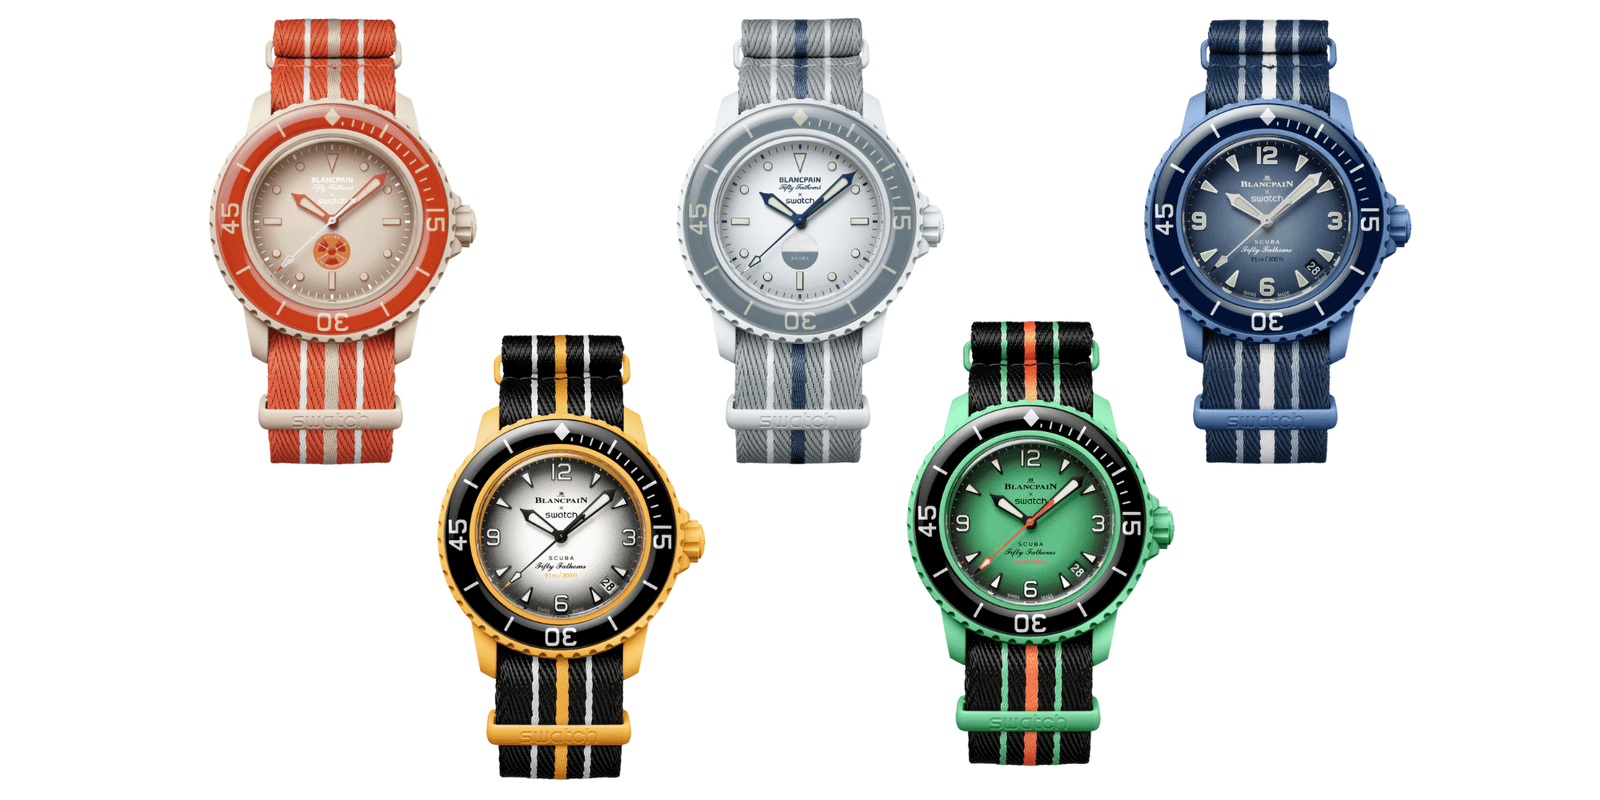 The five launches from the Blancpain x Swatch collection